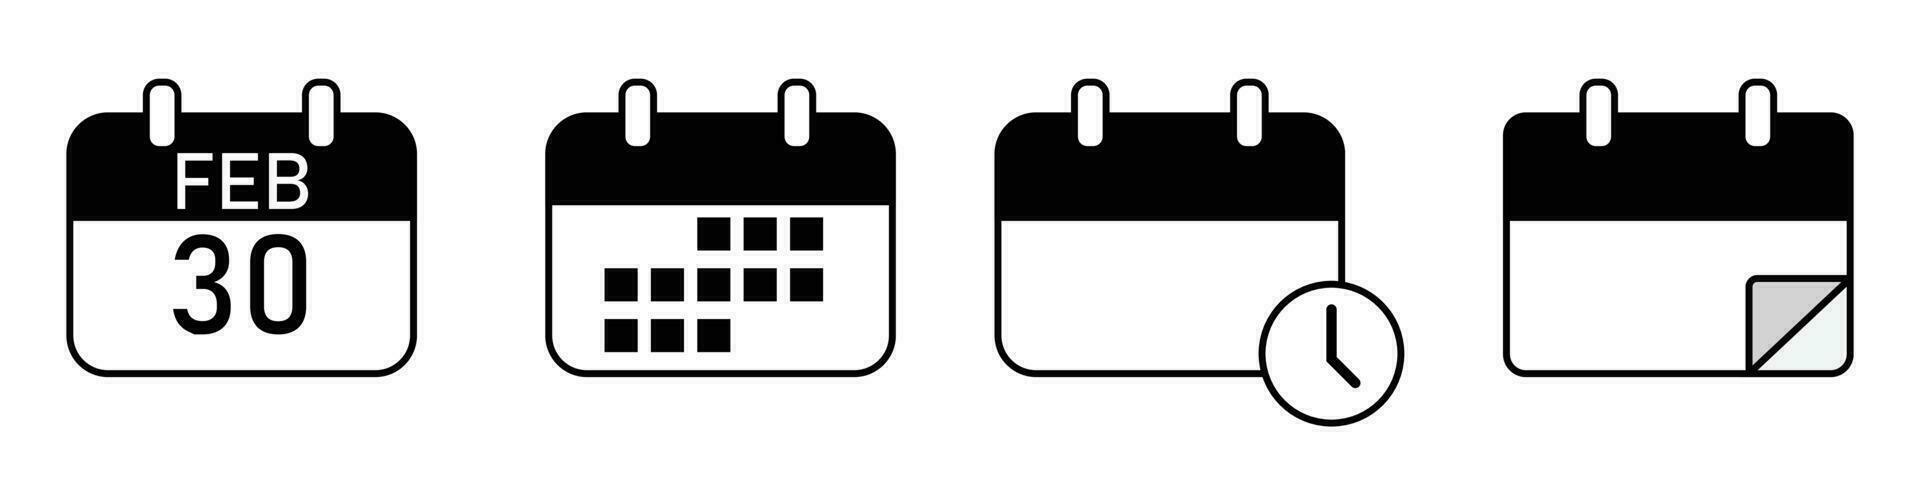 calendar icon date month time icon set vector